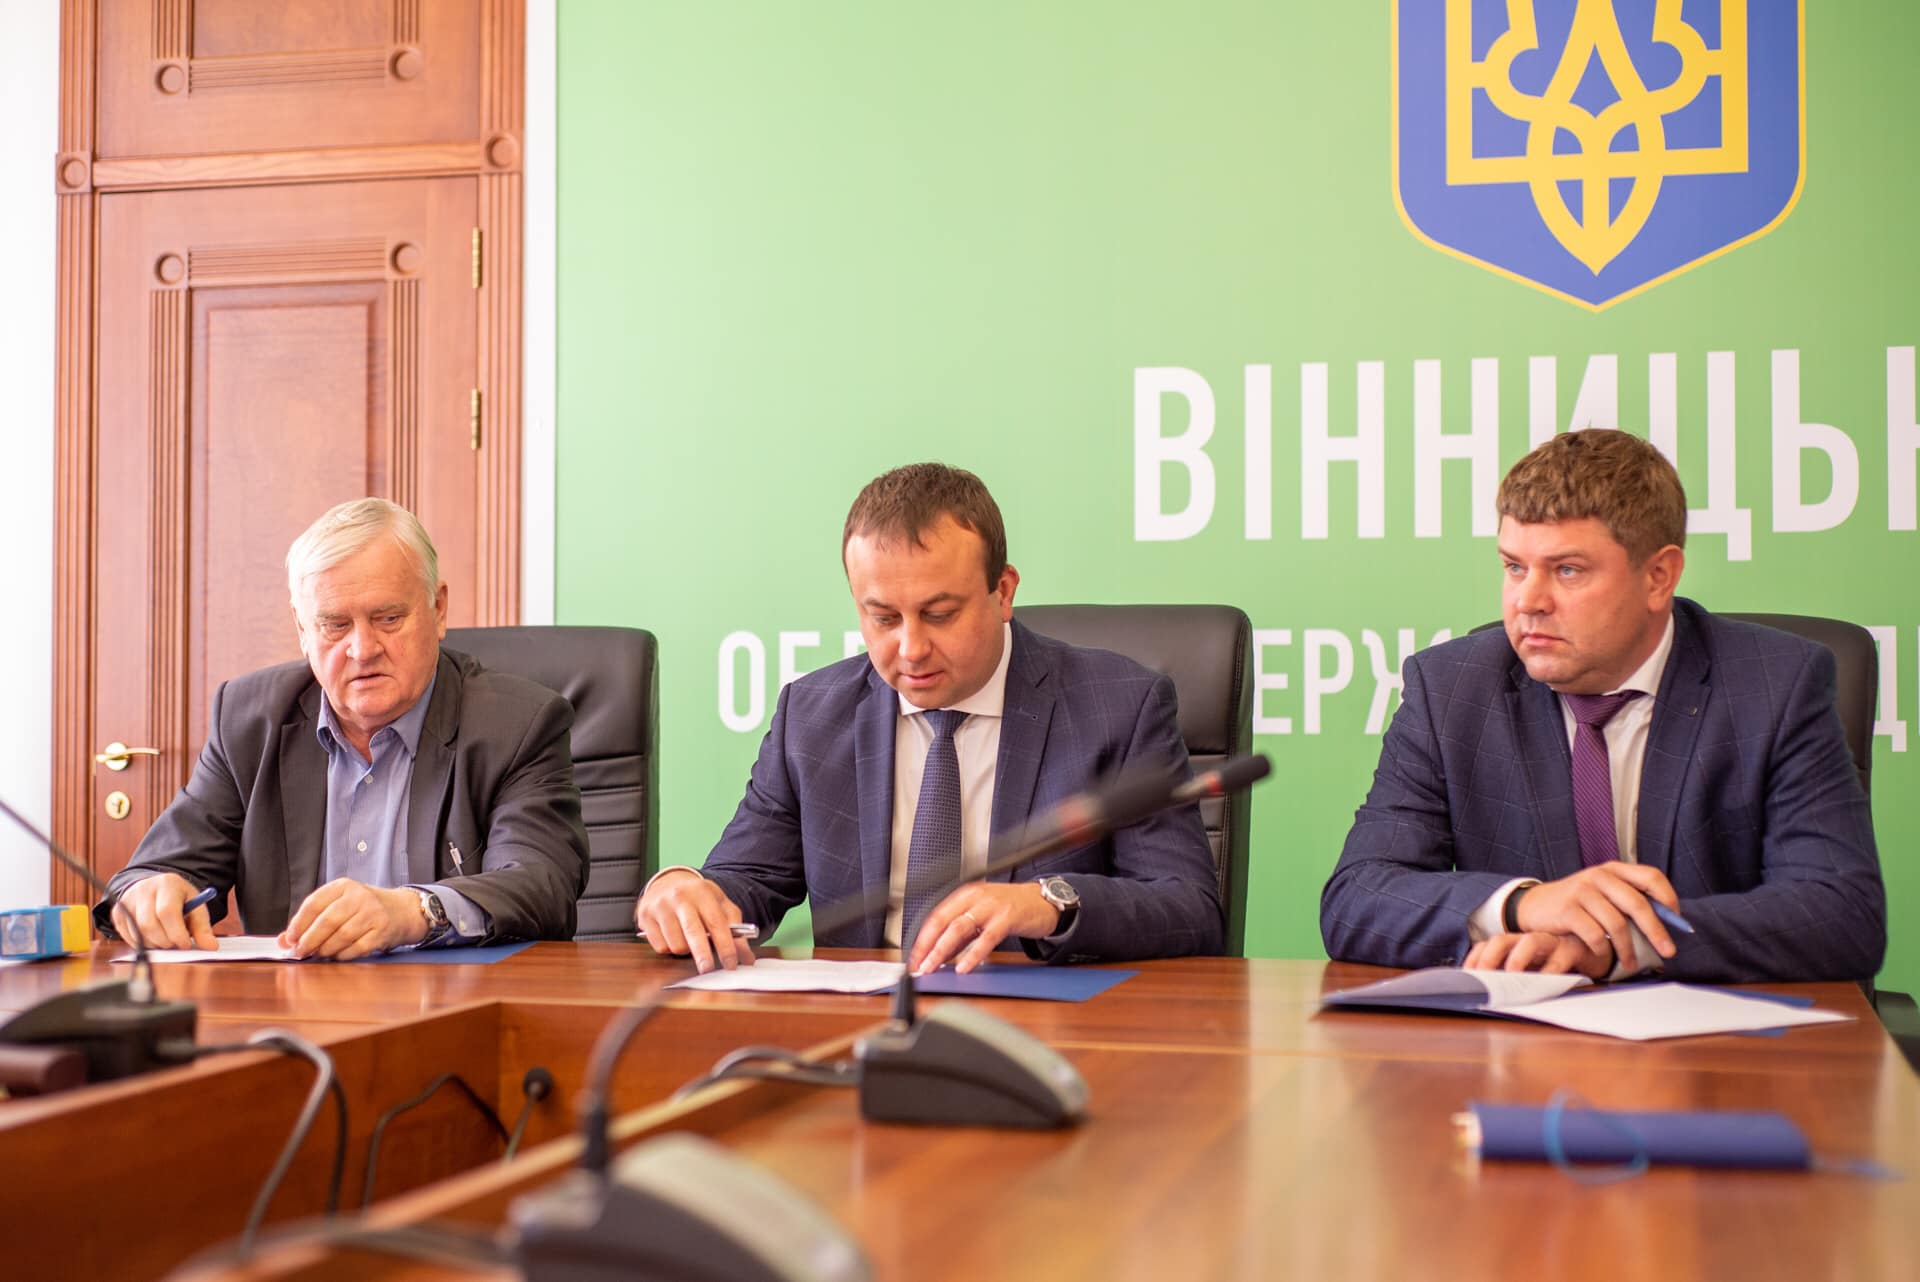 Two vocational education institutions of Vinnytsia region have become participants of the EU4Skills programme